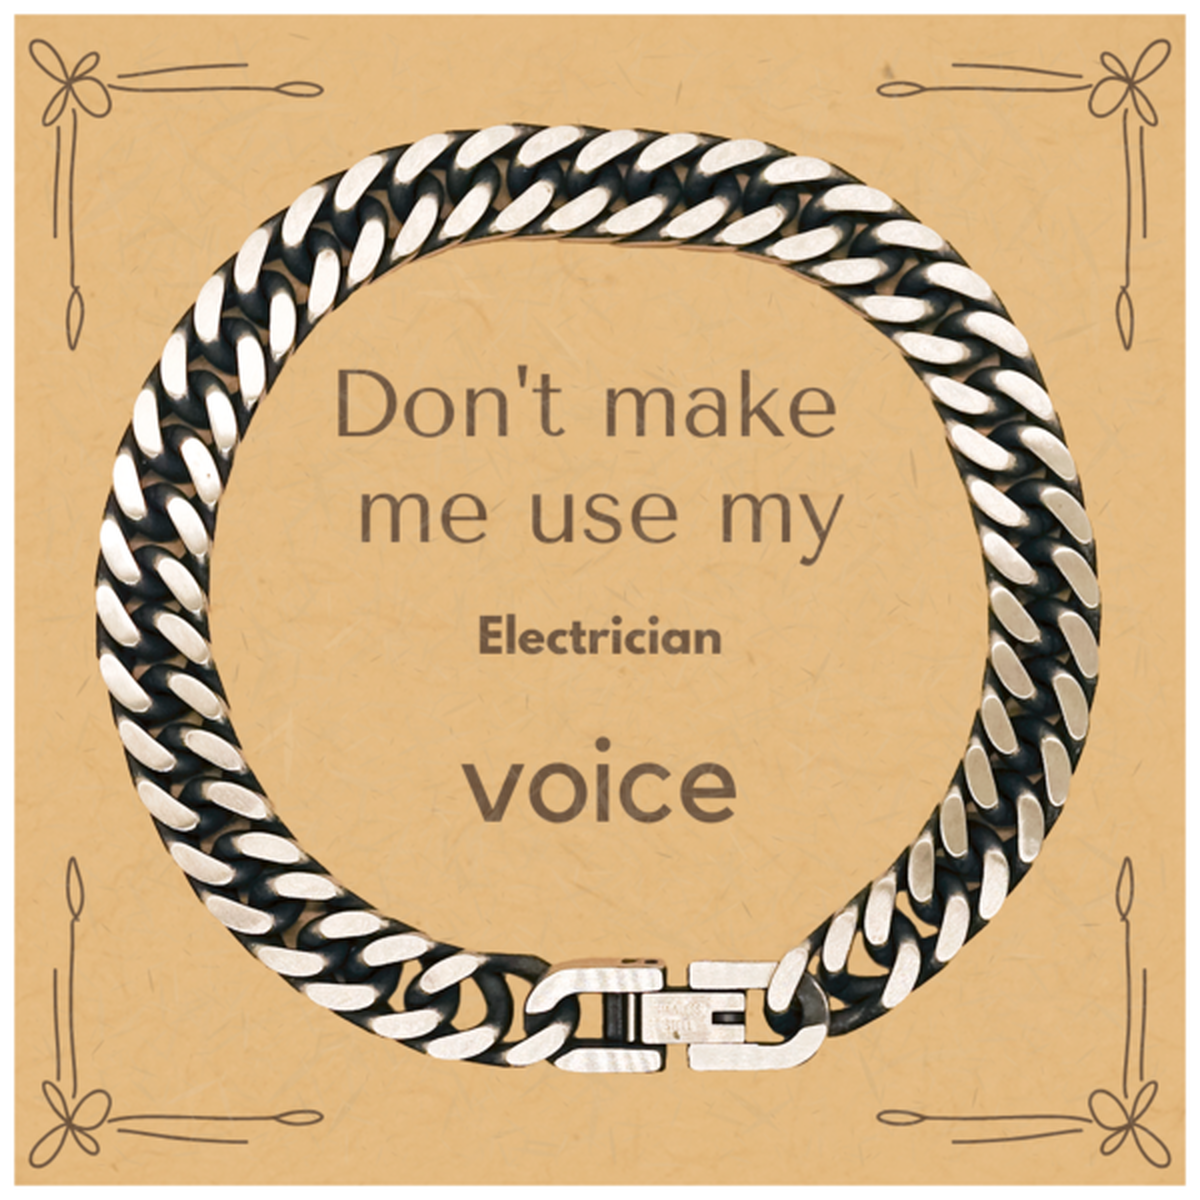 Don't make me use my Electrician voice, Sarcasm Electrician Card Gifts, Christmas Electrician Cuban Link Chain Bracelet Birthday Unique Gifts For Electrician Coworkers, Men, Women, Colleague, Friends